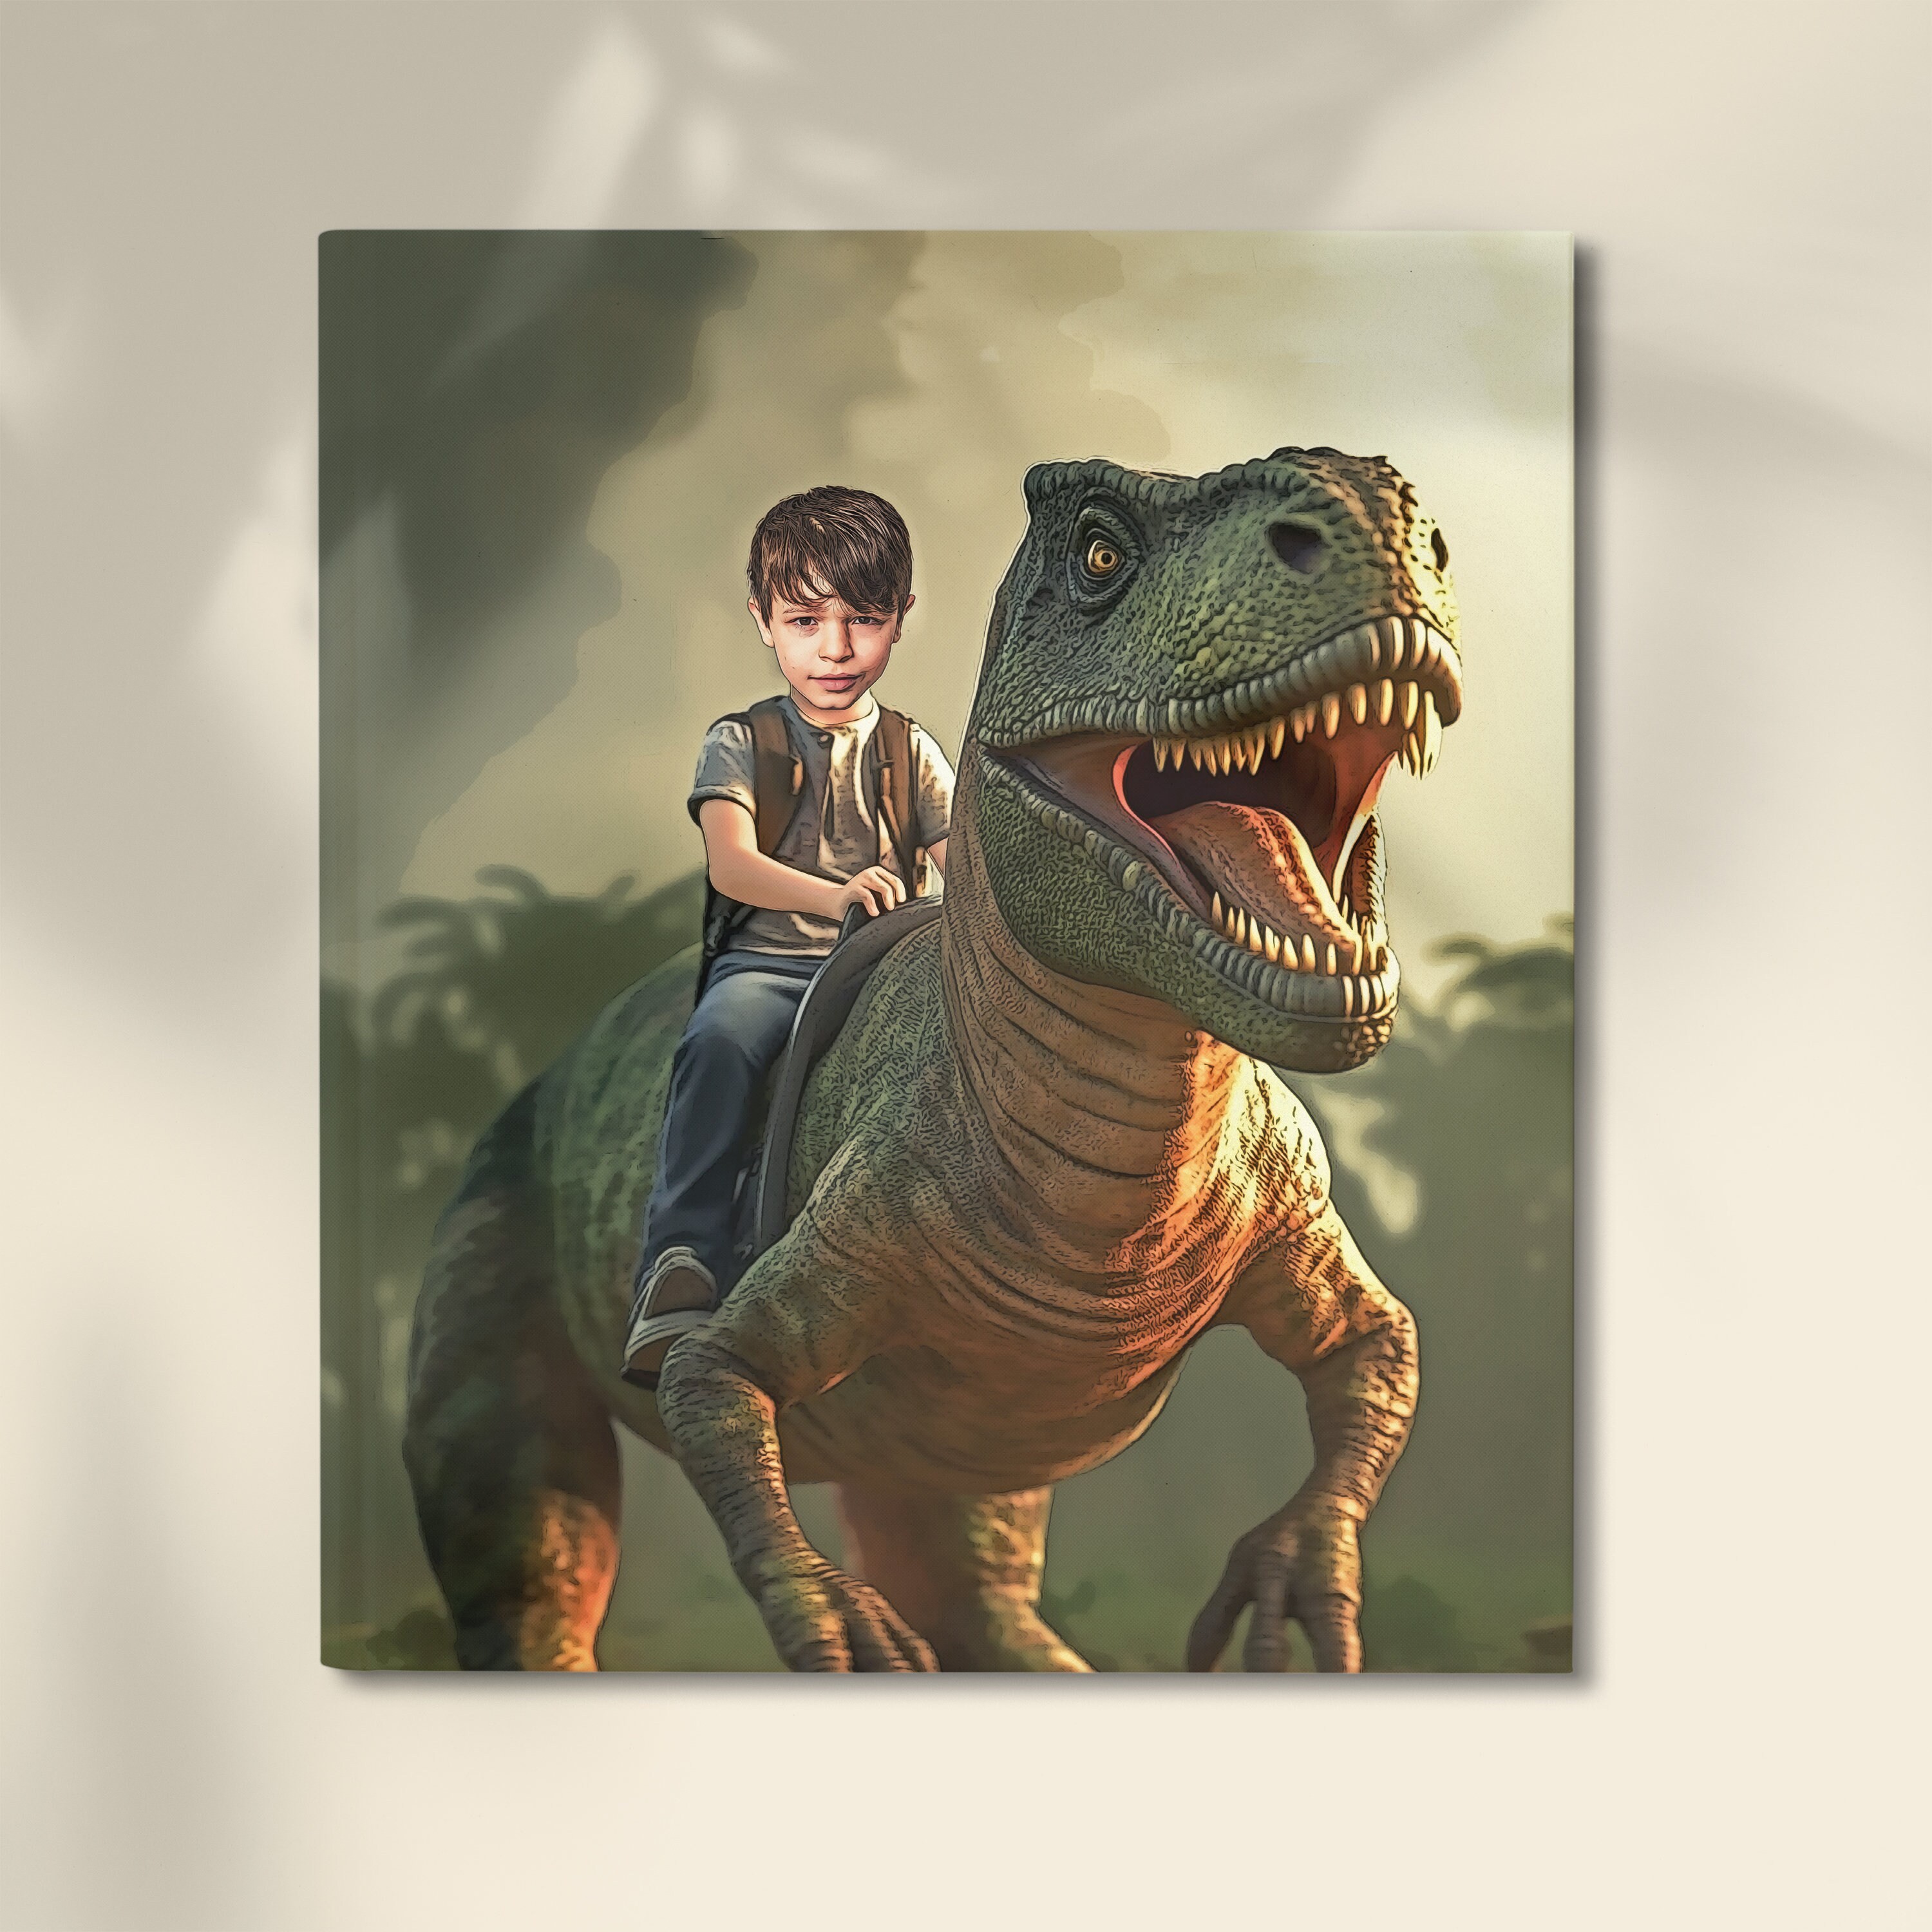 Personalized Jurassic Dinosaur Portrait - Riding a dinosaur - T-REX - Custom With Dinosaur Portrait From Your Photo - Gift For Kids